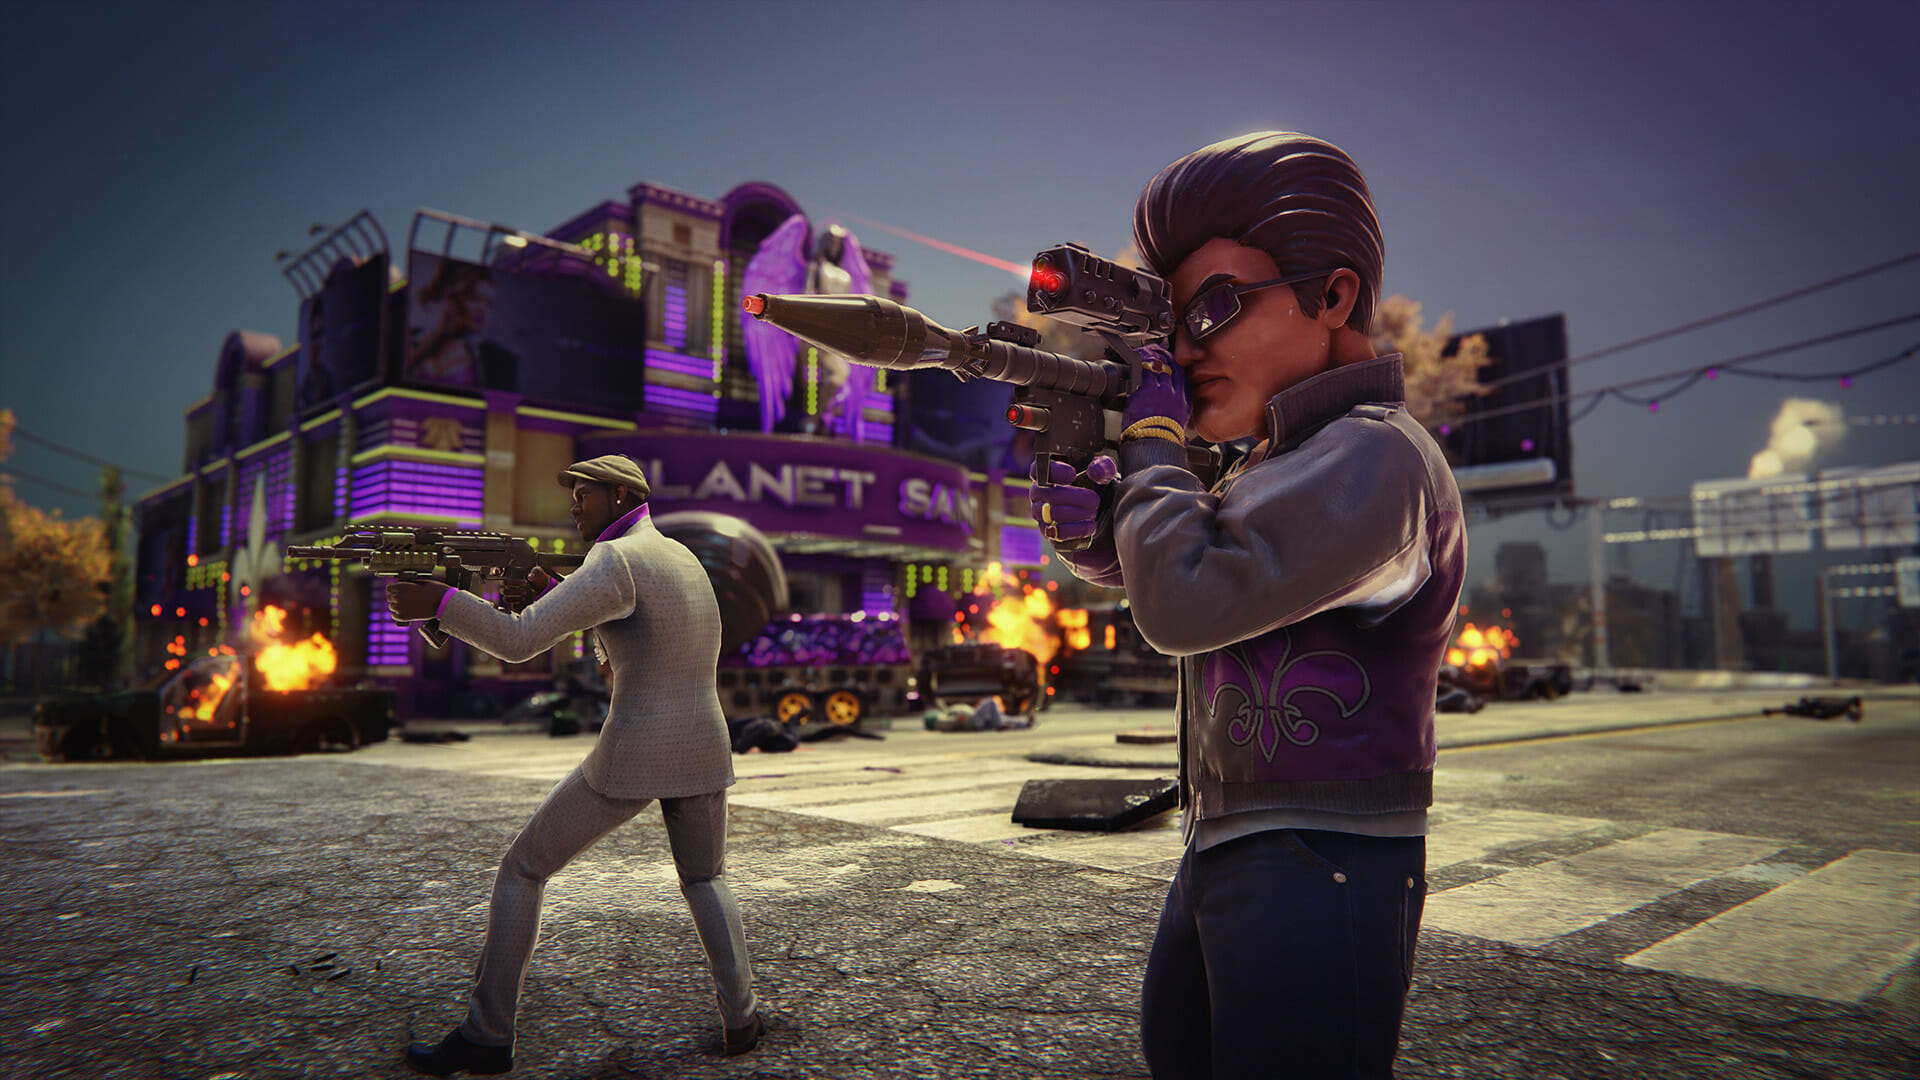 Laggy Cutscenes In Saints Row The Third Remastered